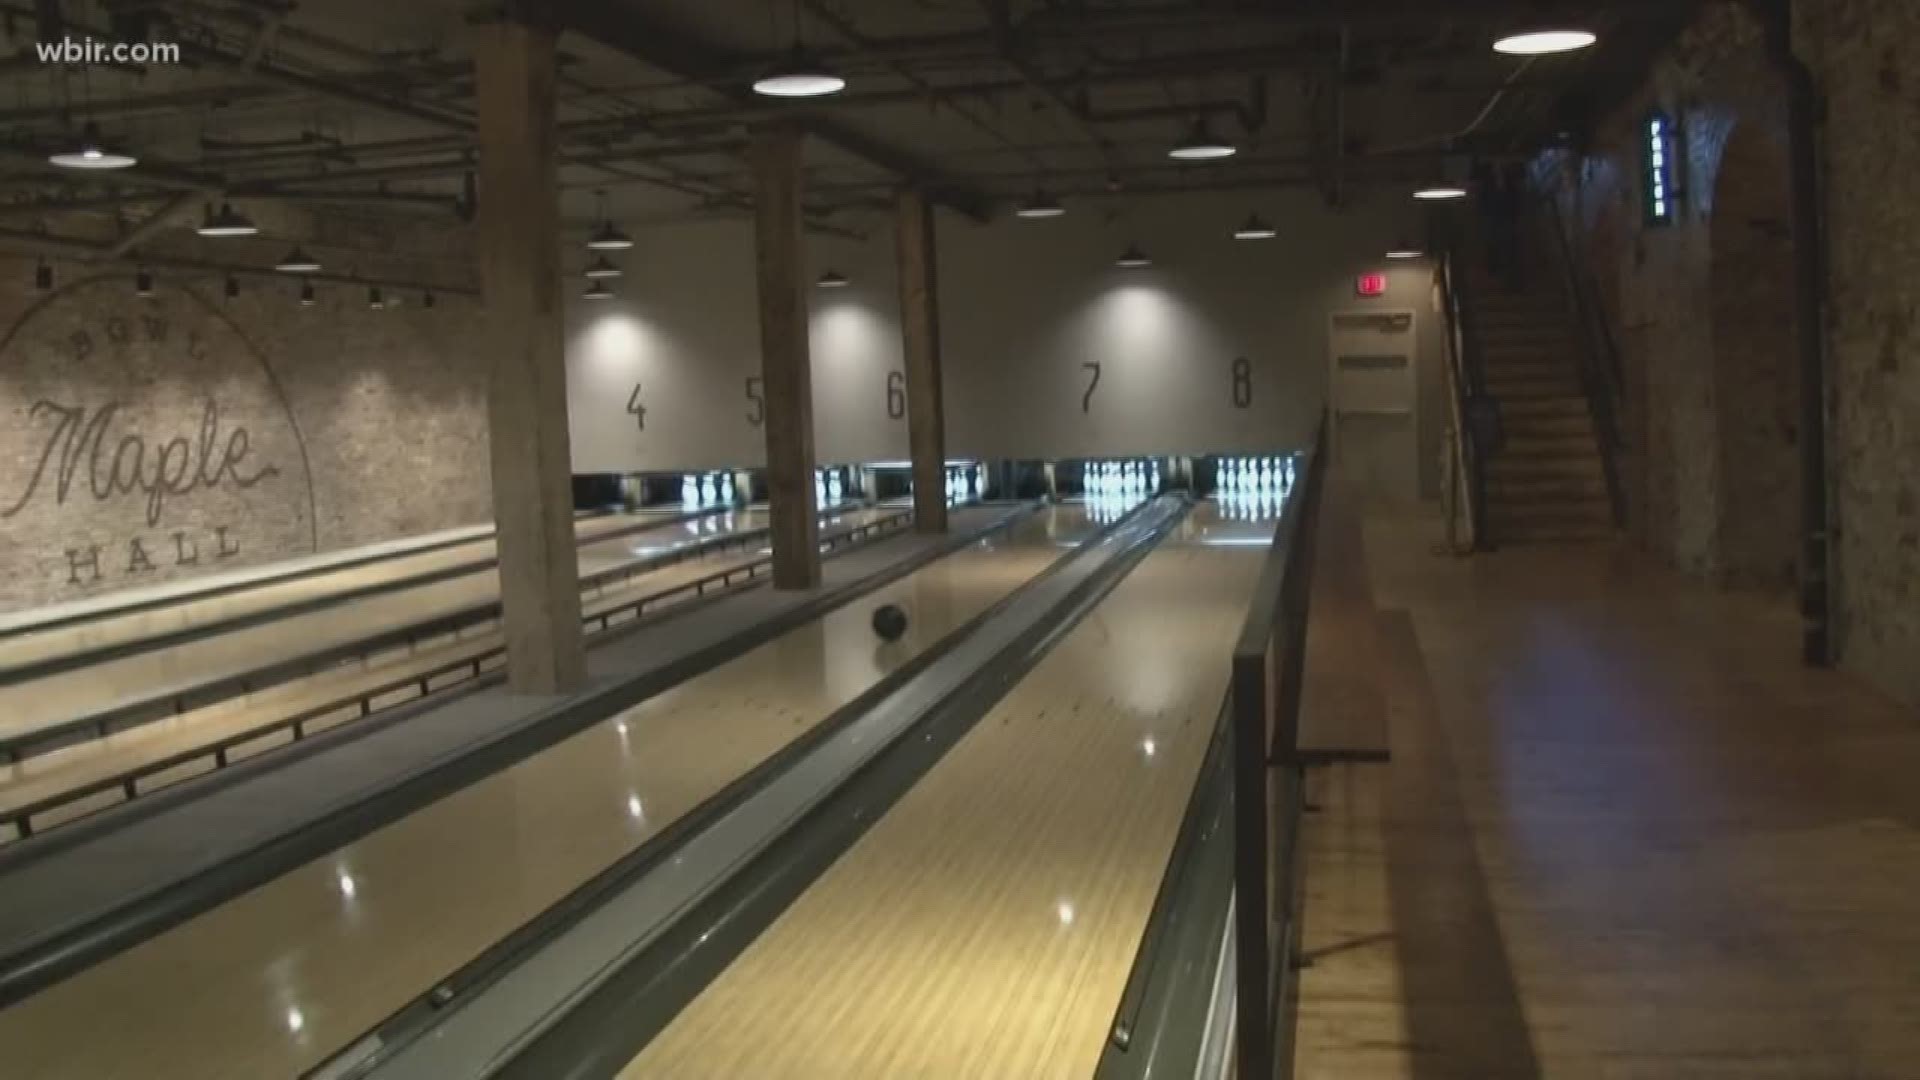 To honor their third anniversary, Maple Hall on Gay Street is offering free bowling until midnight. June 27, 2019-4pm.